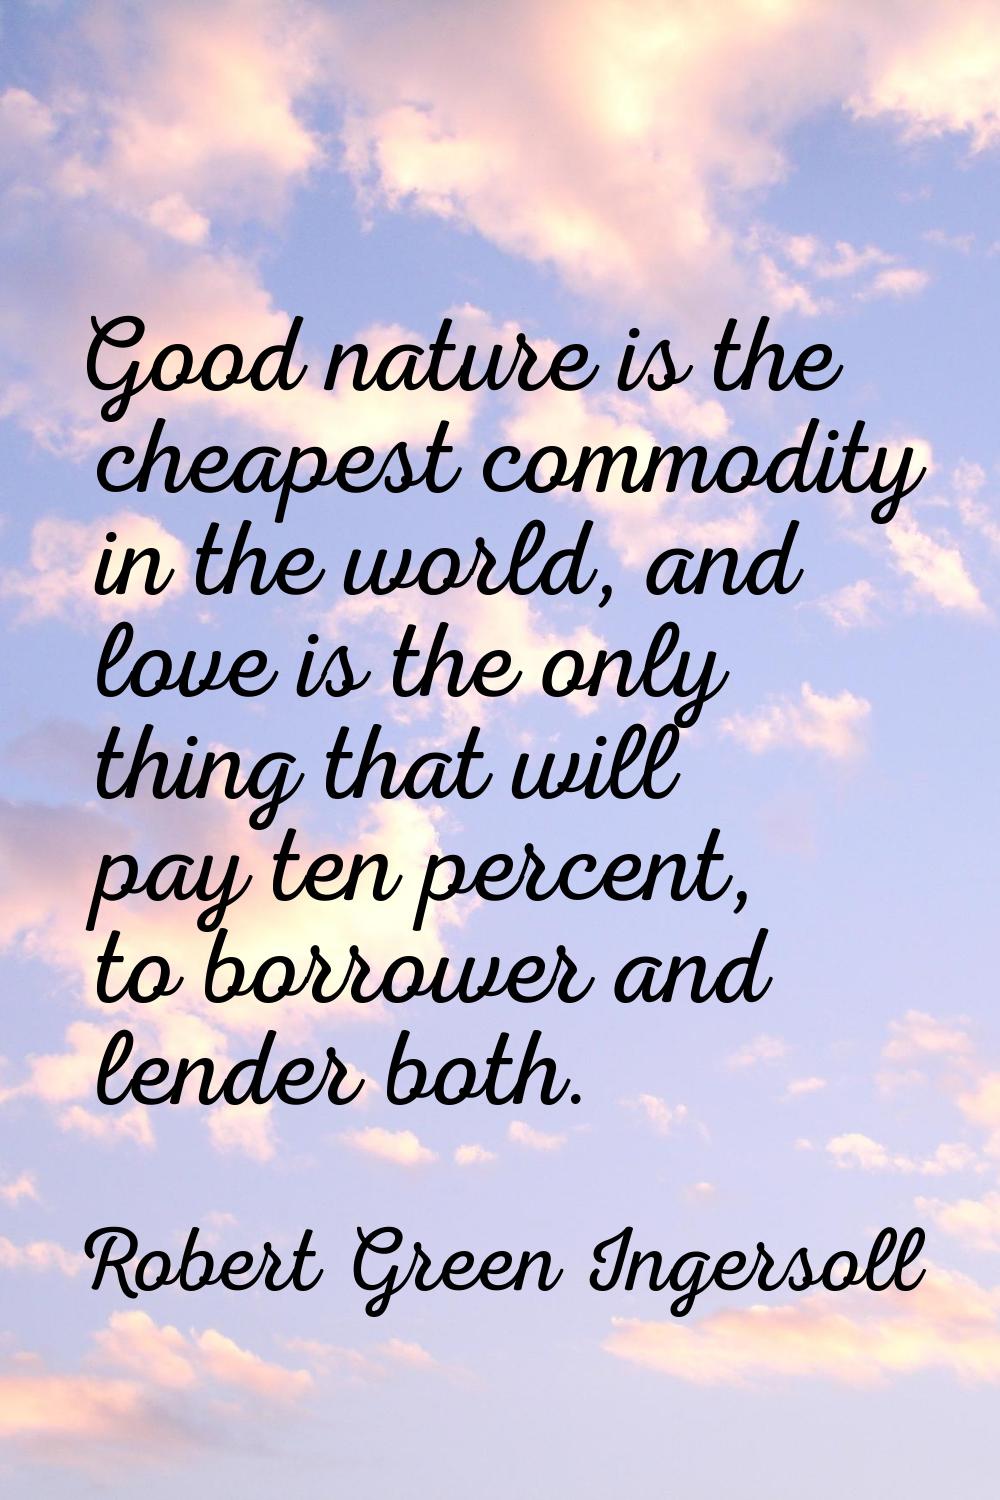 Good nature is the cheapest commodity in the world, and love is the only thing that will pay ten pe